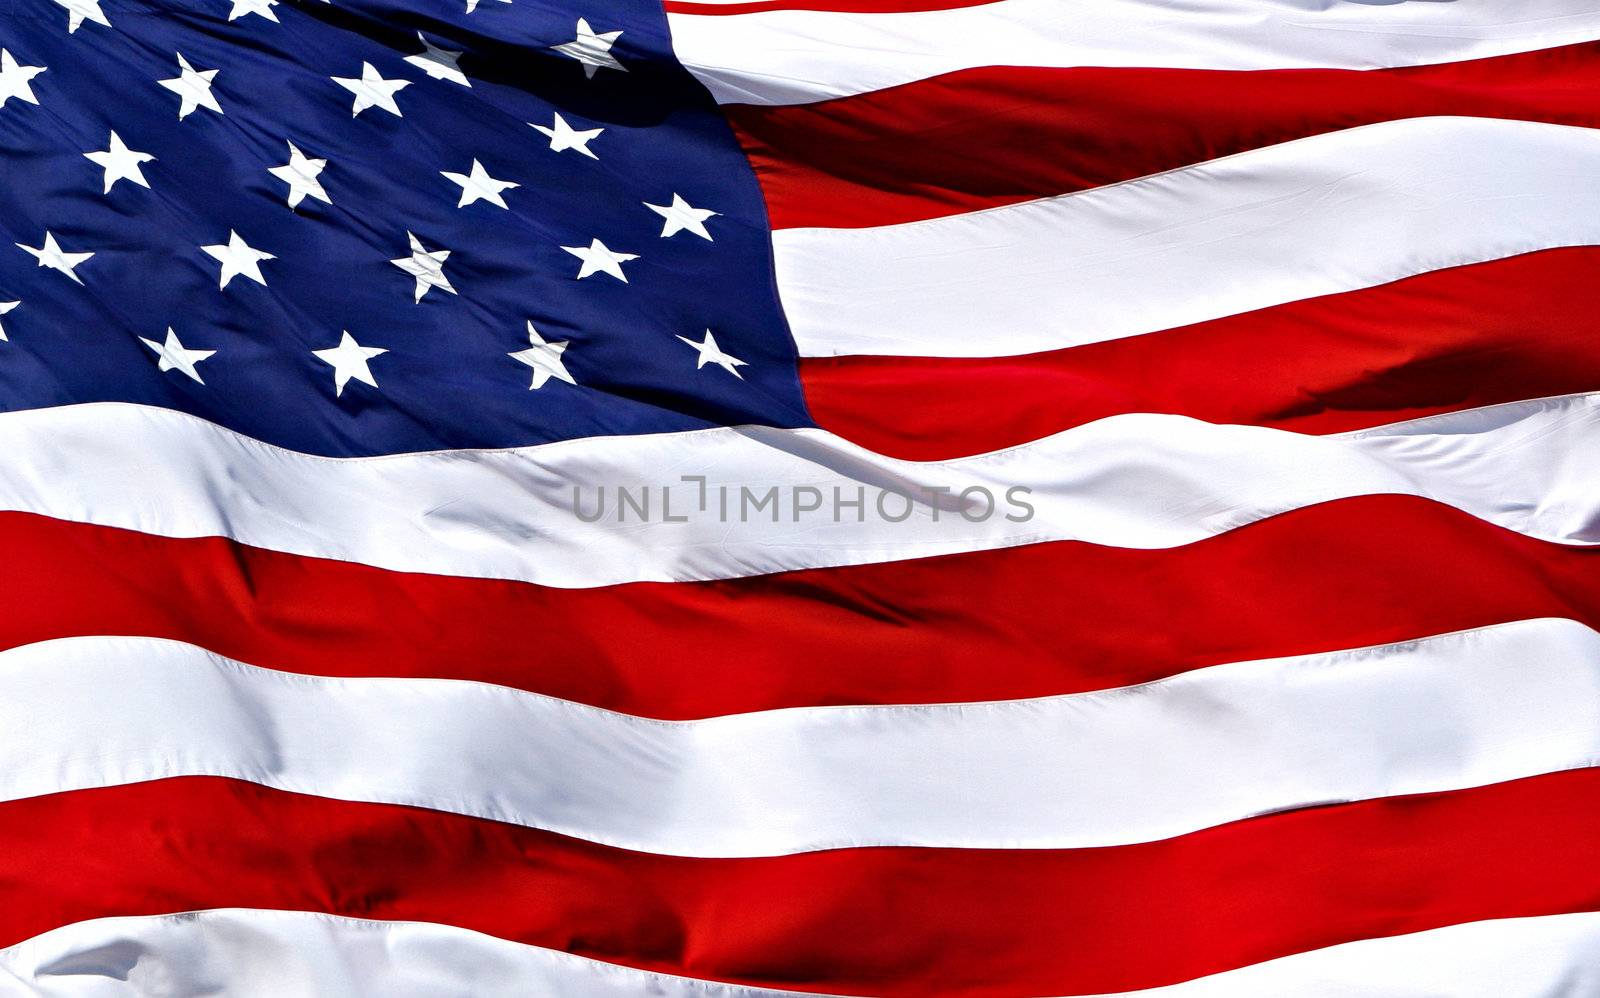 American flag background - shot and lit in studio by ozaiachin